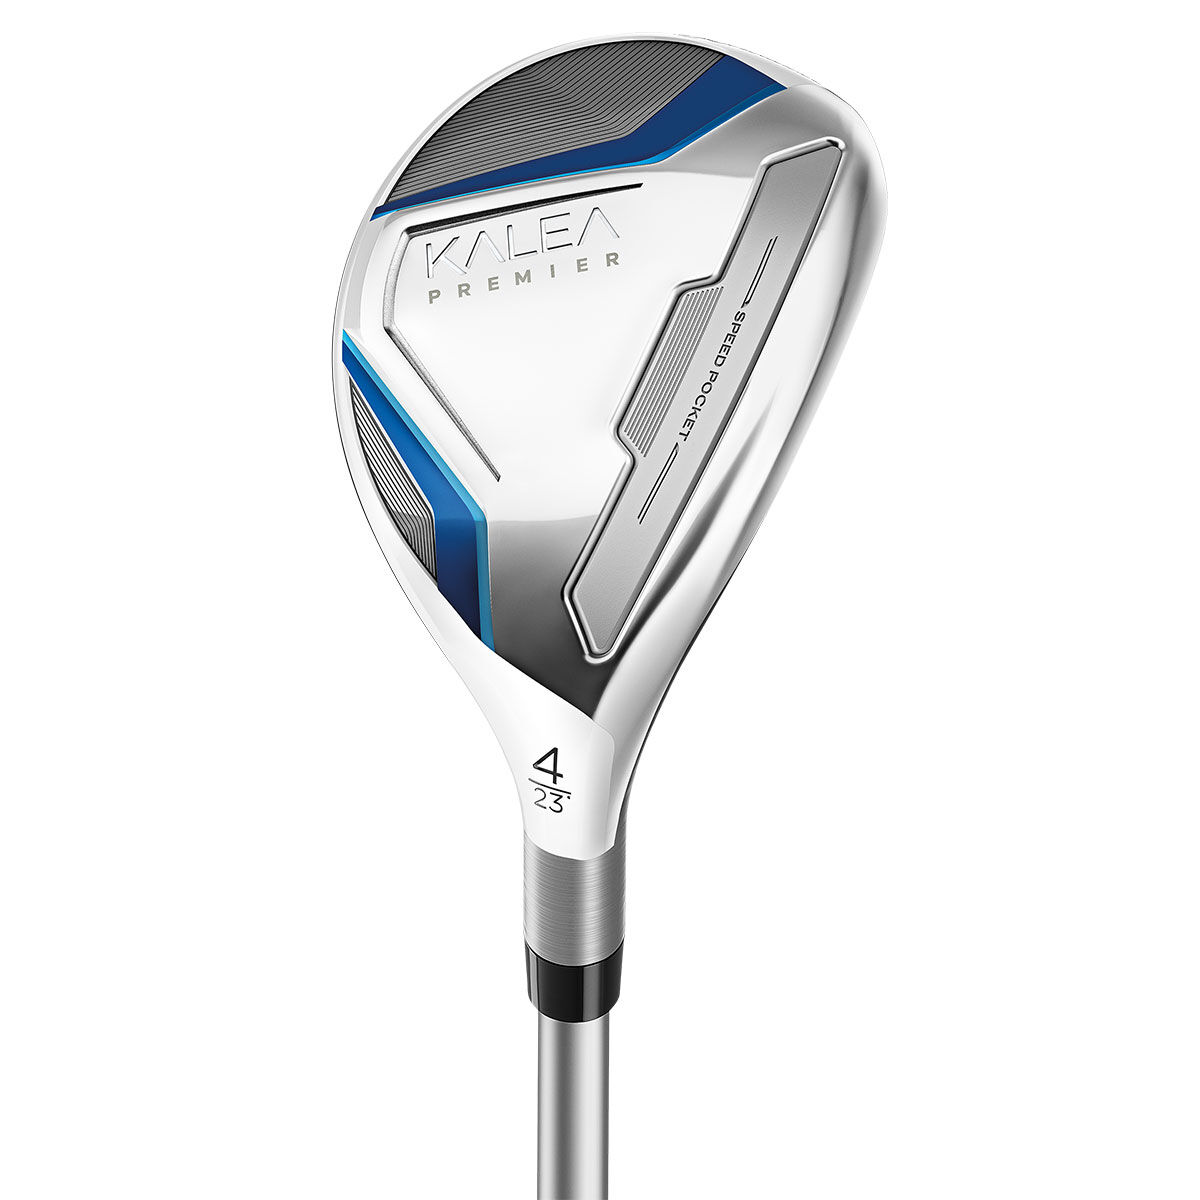 TaylorMade Silver and Blue Women's Kalea Premier Right Hand Golf Hybrid, Size: 31° | American Golf von TaylorMade